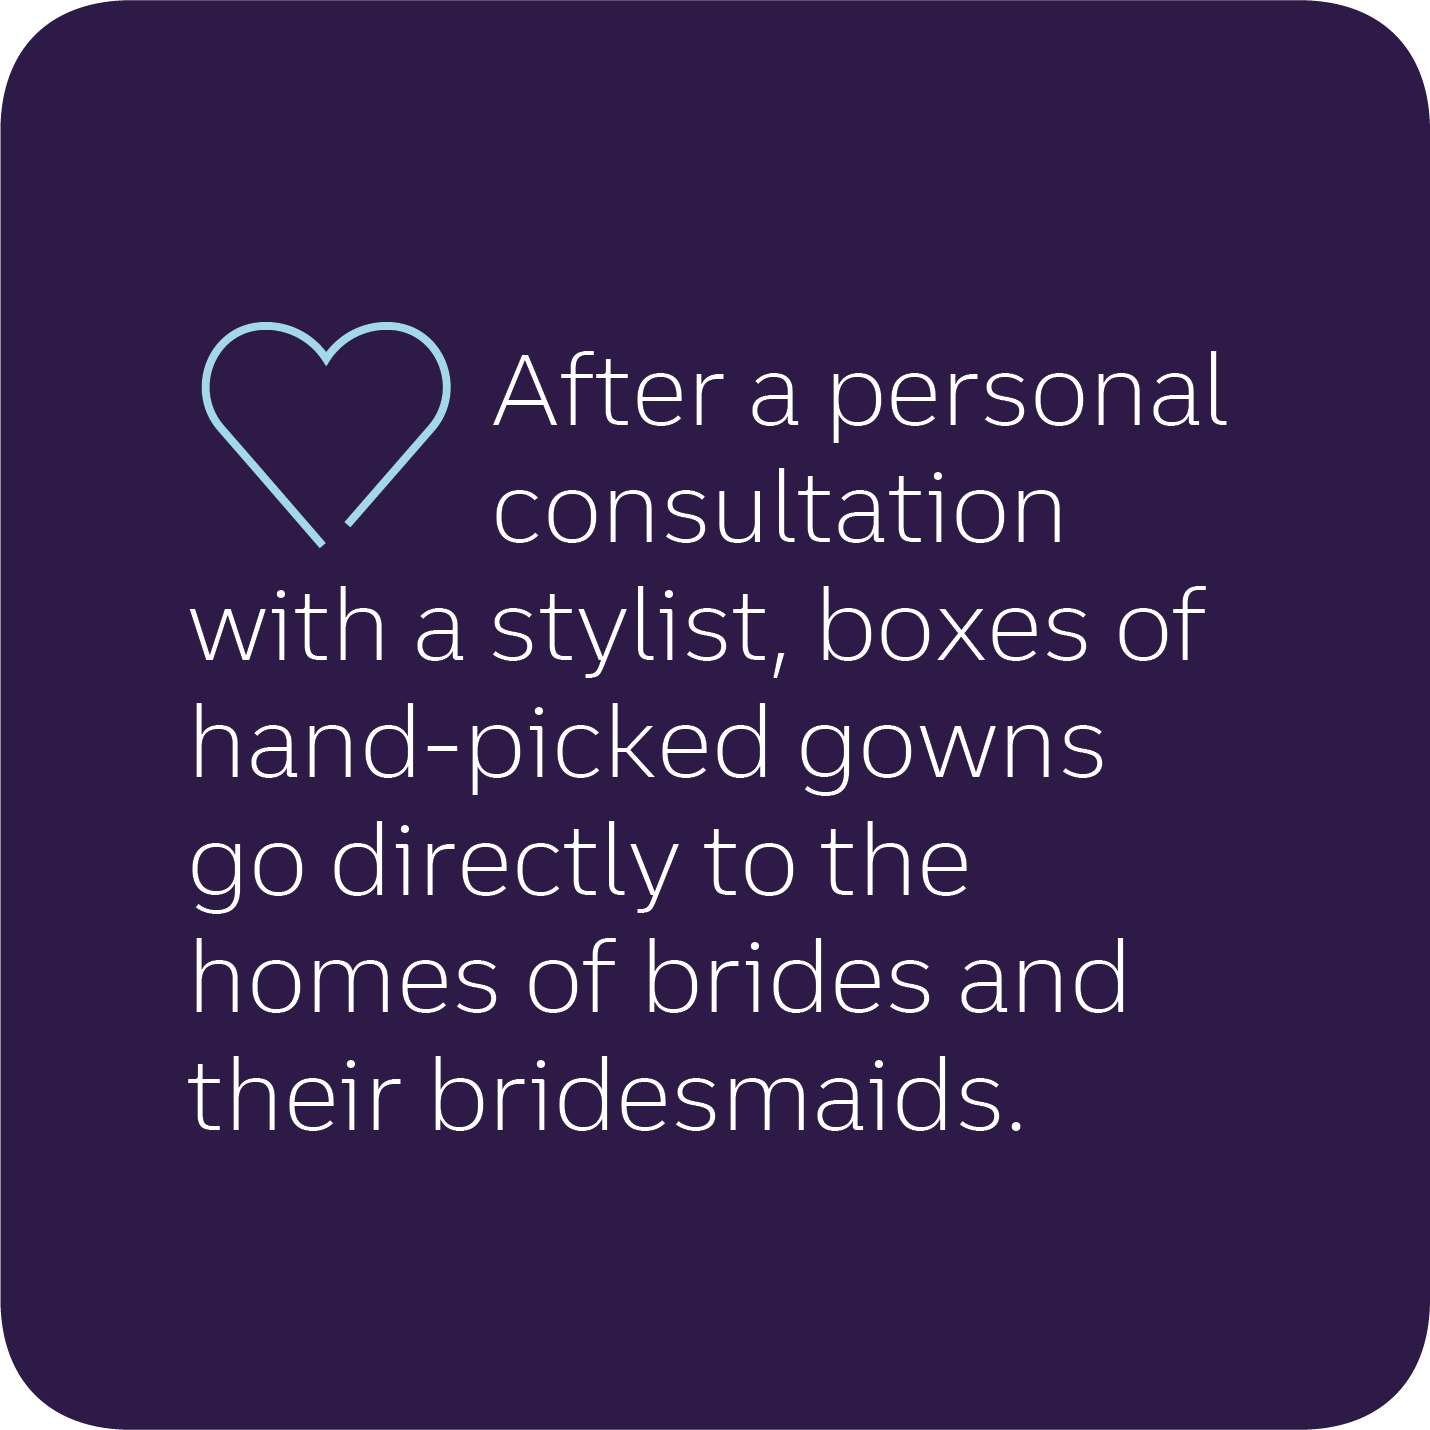 Image a quote that says after a personal consultation with a stylist, boxes of hand-picked gowns go directly to the homes of brides and thei bridesmaids